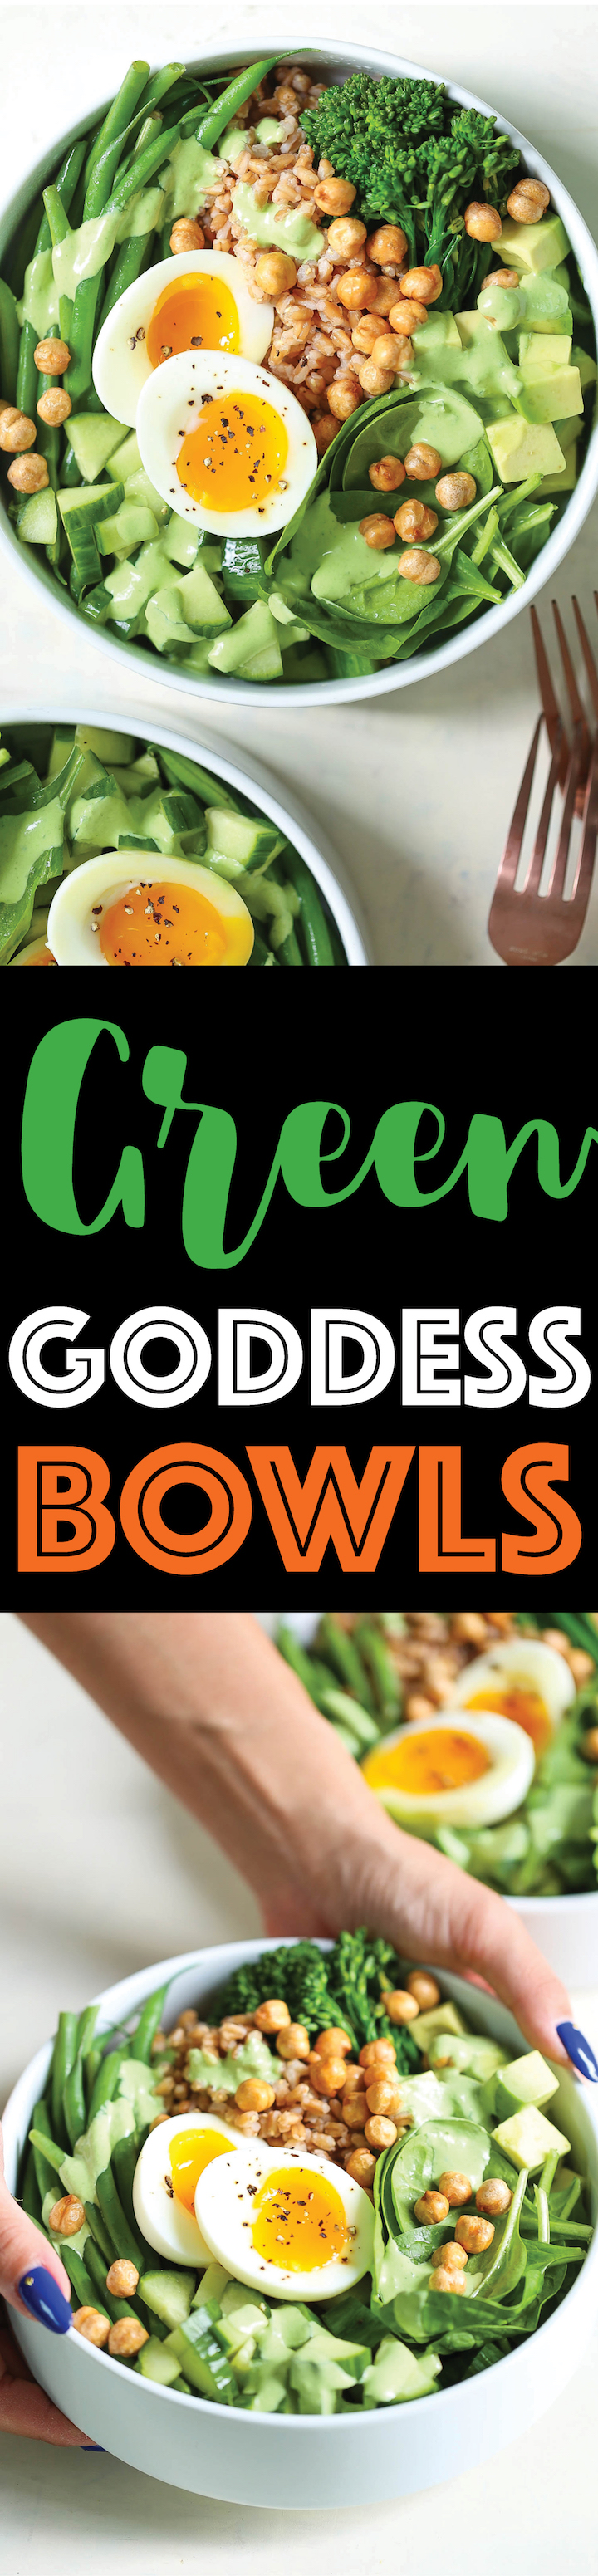 Green Goddess Bowls - A healthy, glowing grain bowl that is so bright and GREEEN! Loaded with spinach, broccolini, green beans, cucumber, avocado, tarragon, mint and the best goddess dressing ever!